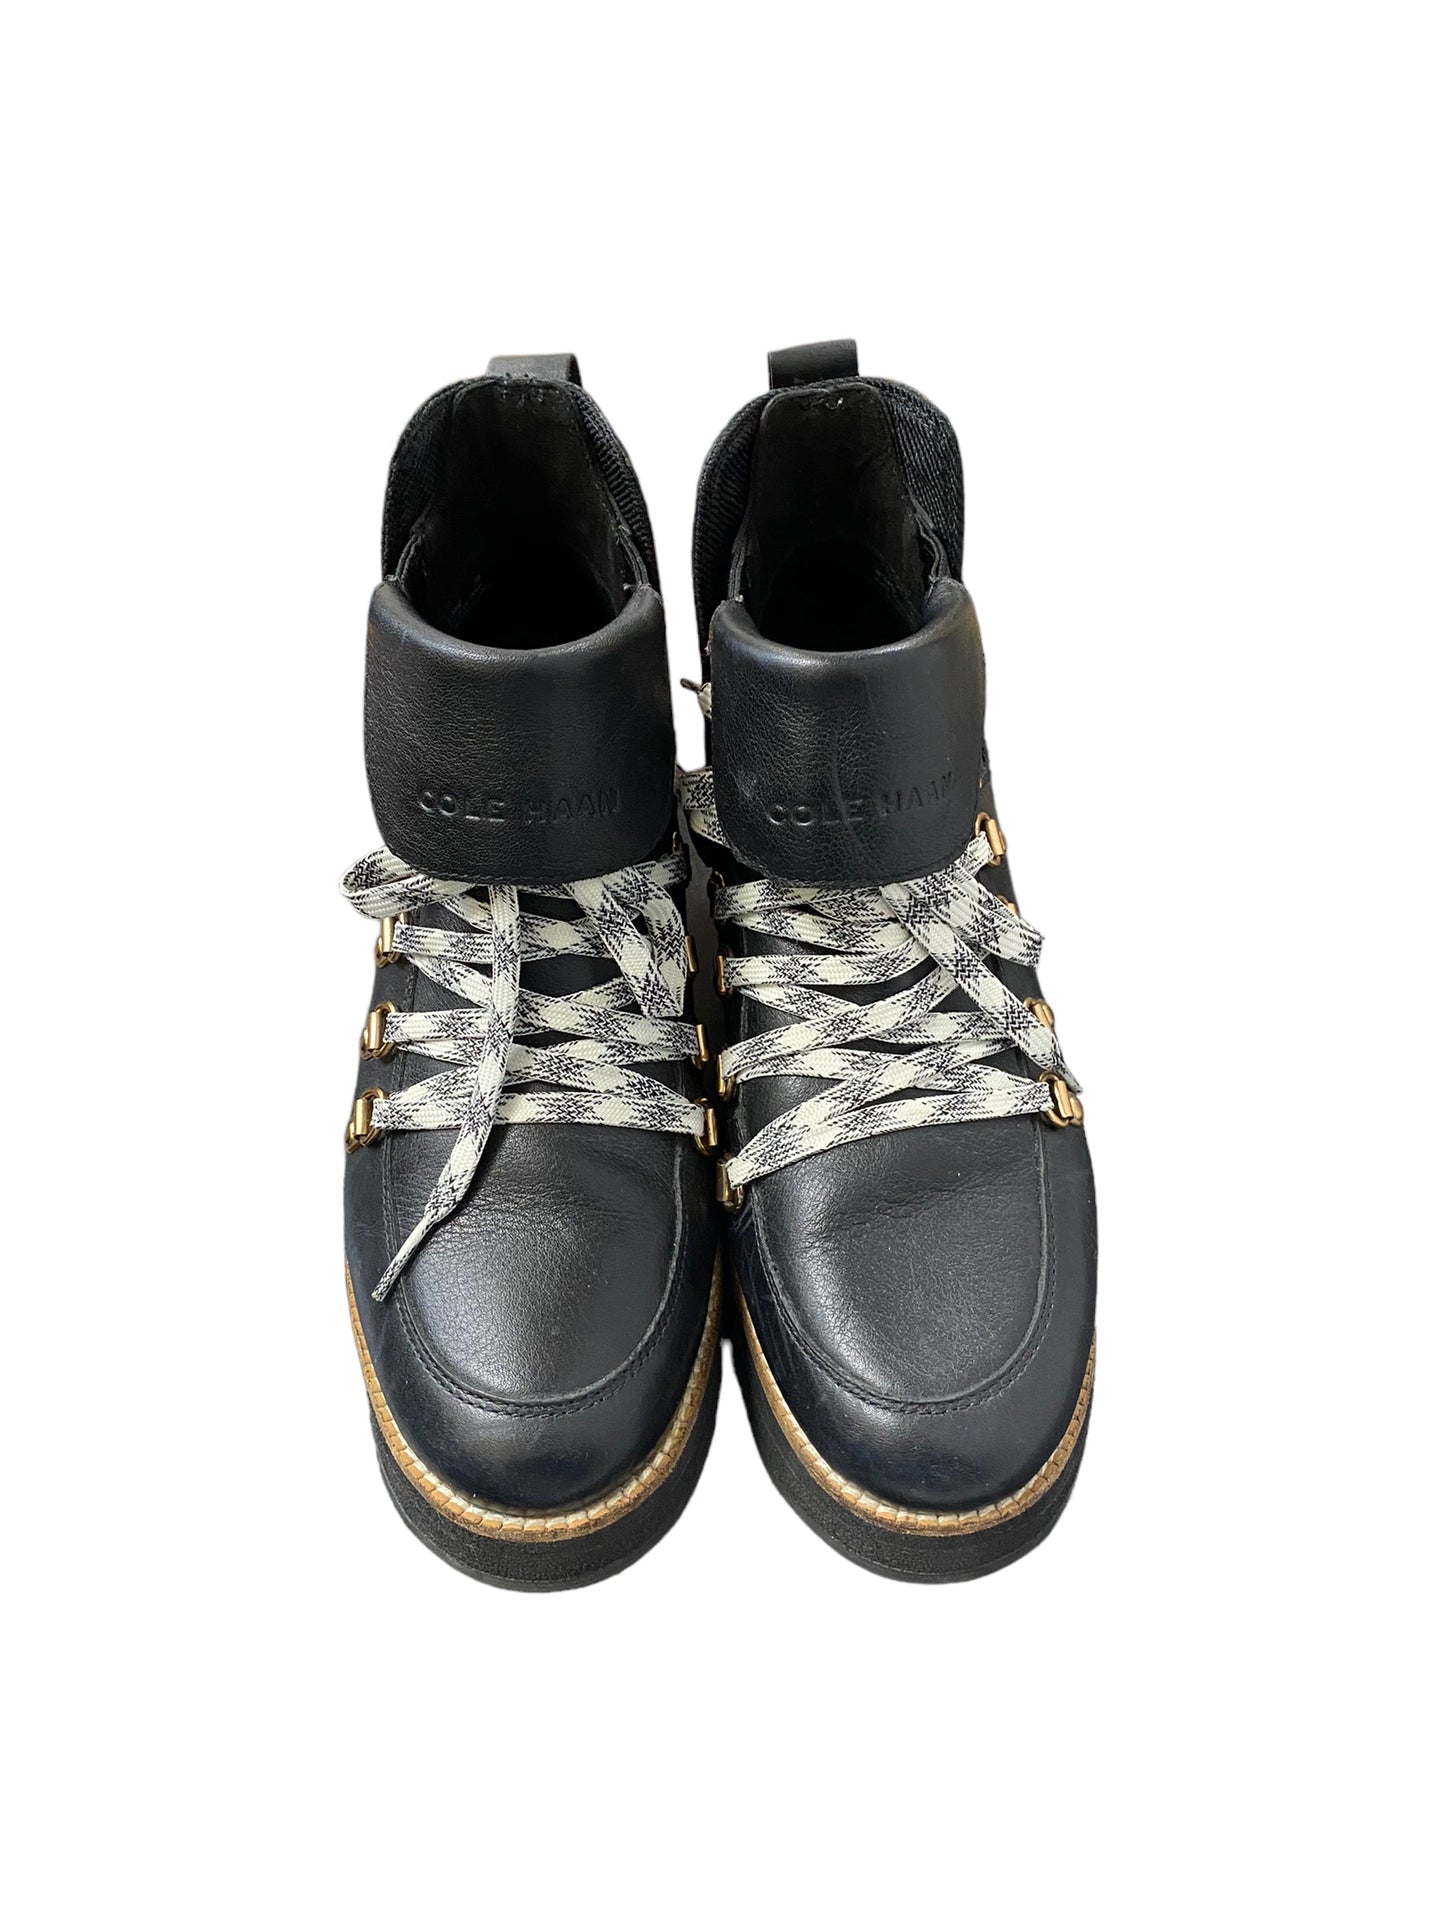 Boots Combat By Cole-haan  Size: 7